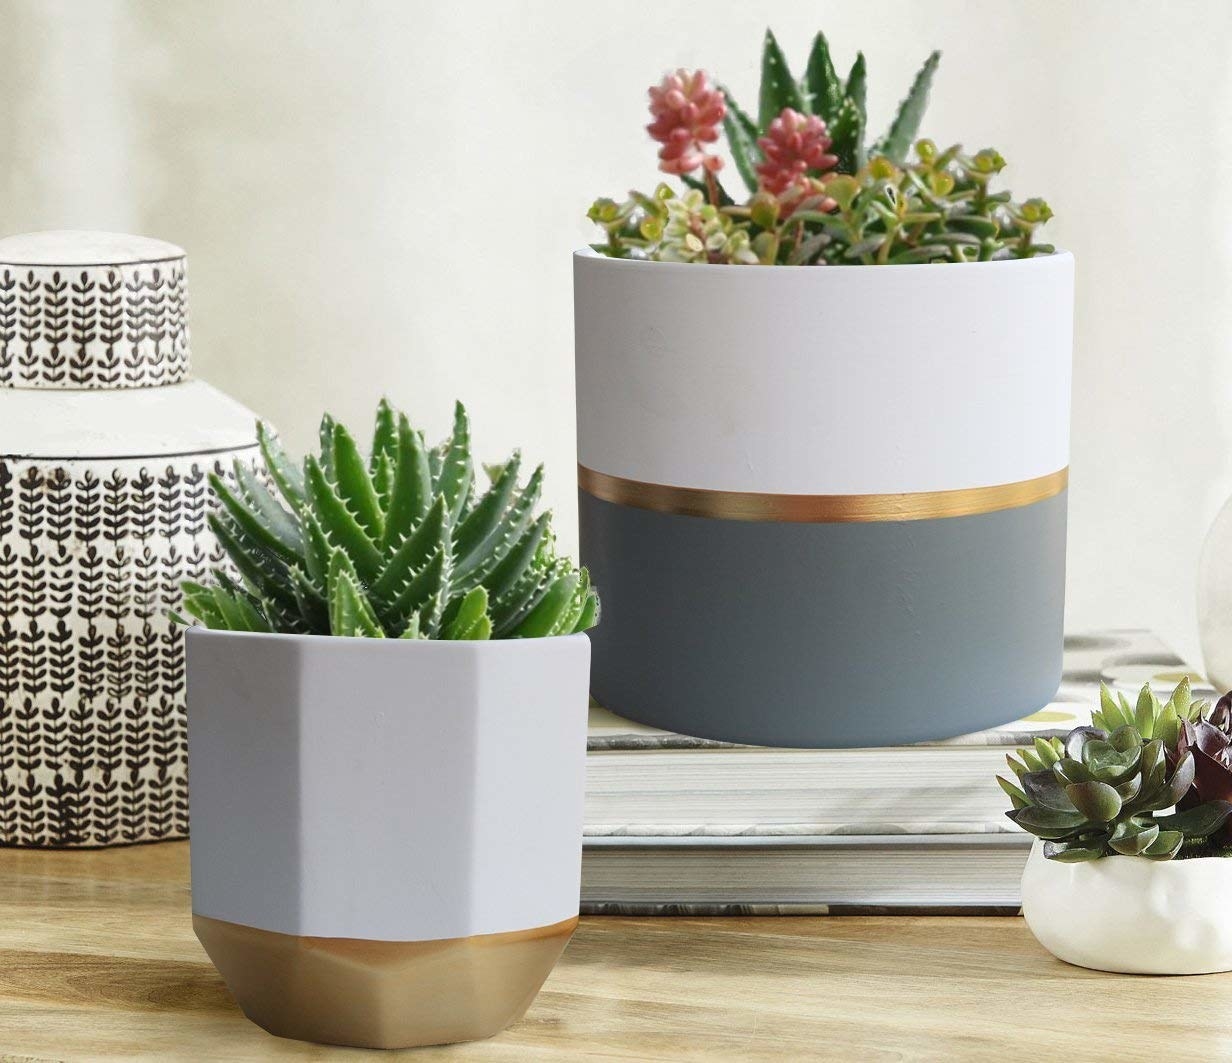 A small white and gold geometric planter and a larger circular white, grey, and gold planter with plants inside